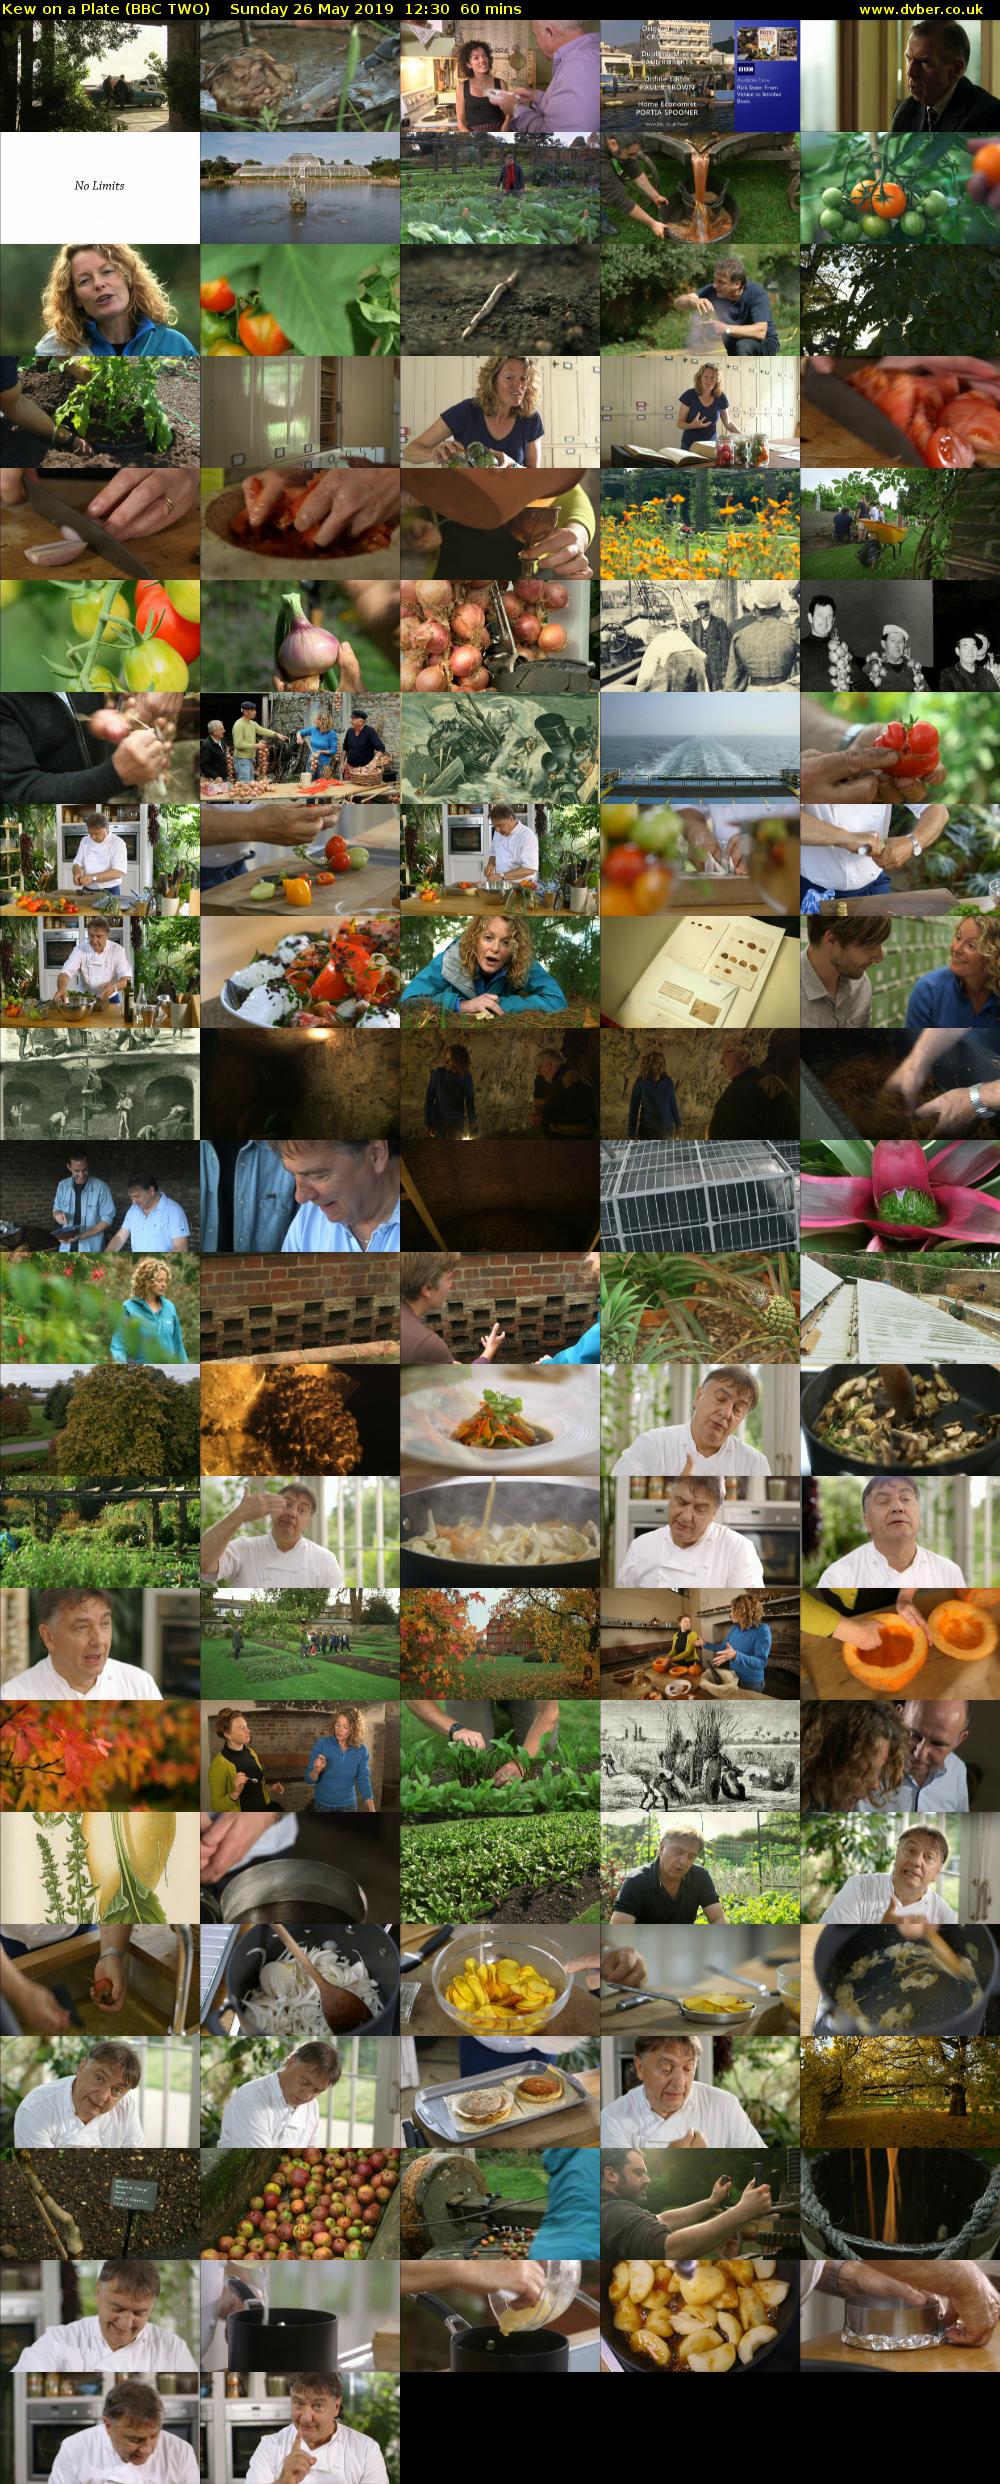 Kew on a Plate (BBC TWO) Sunday 26 May 2019 12:30 - 13:30